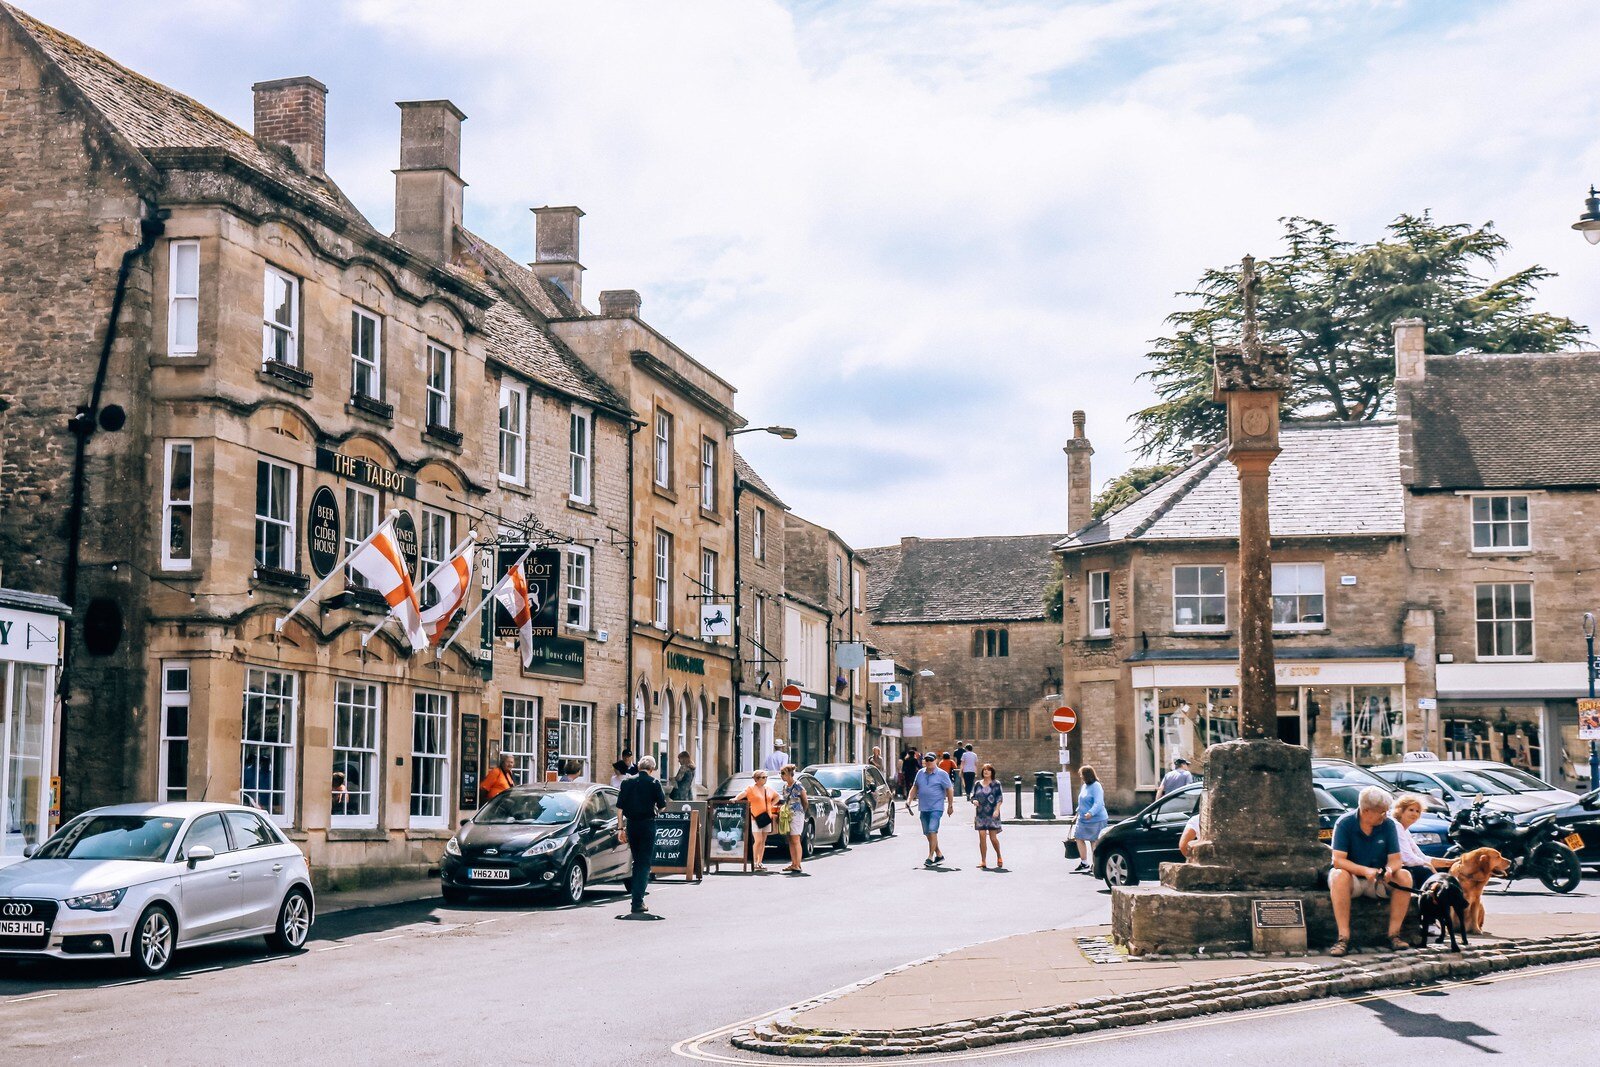 Stow on the Wold in the Cotswolds